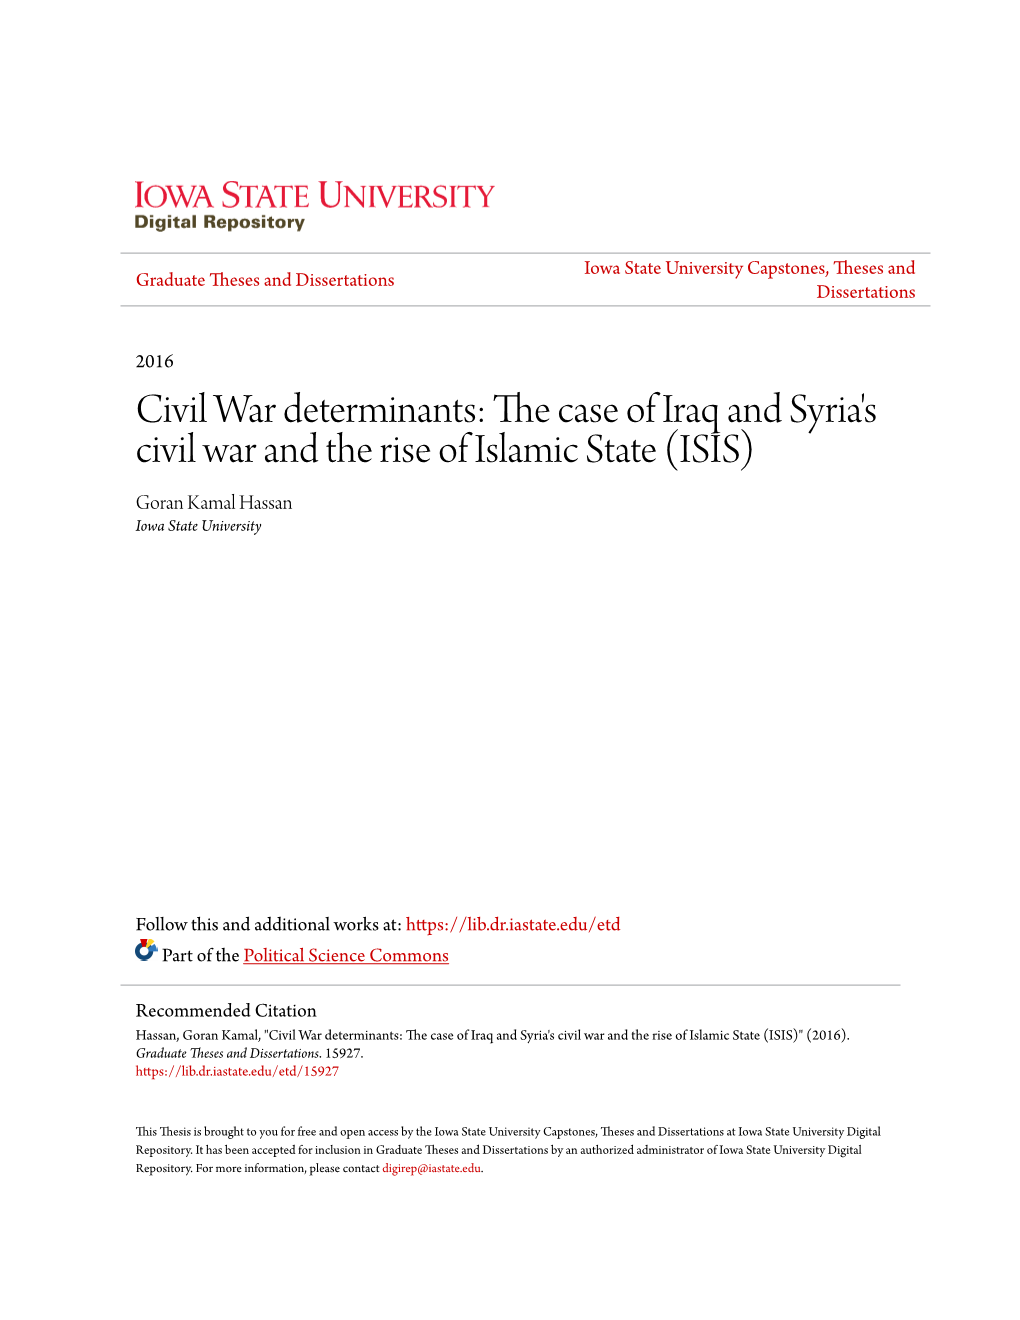 Civil War Determinants: the Ac Se of Iraq and Syria's Civil War and the Rise of Islamic State (ISIS) Goran Kamal Hassan Iowa State University